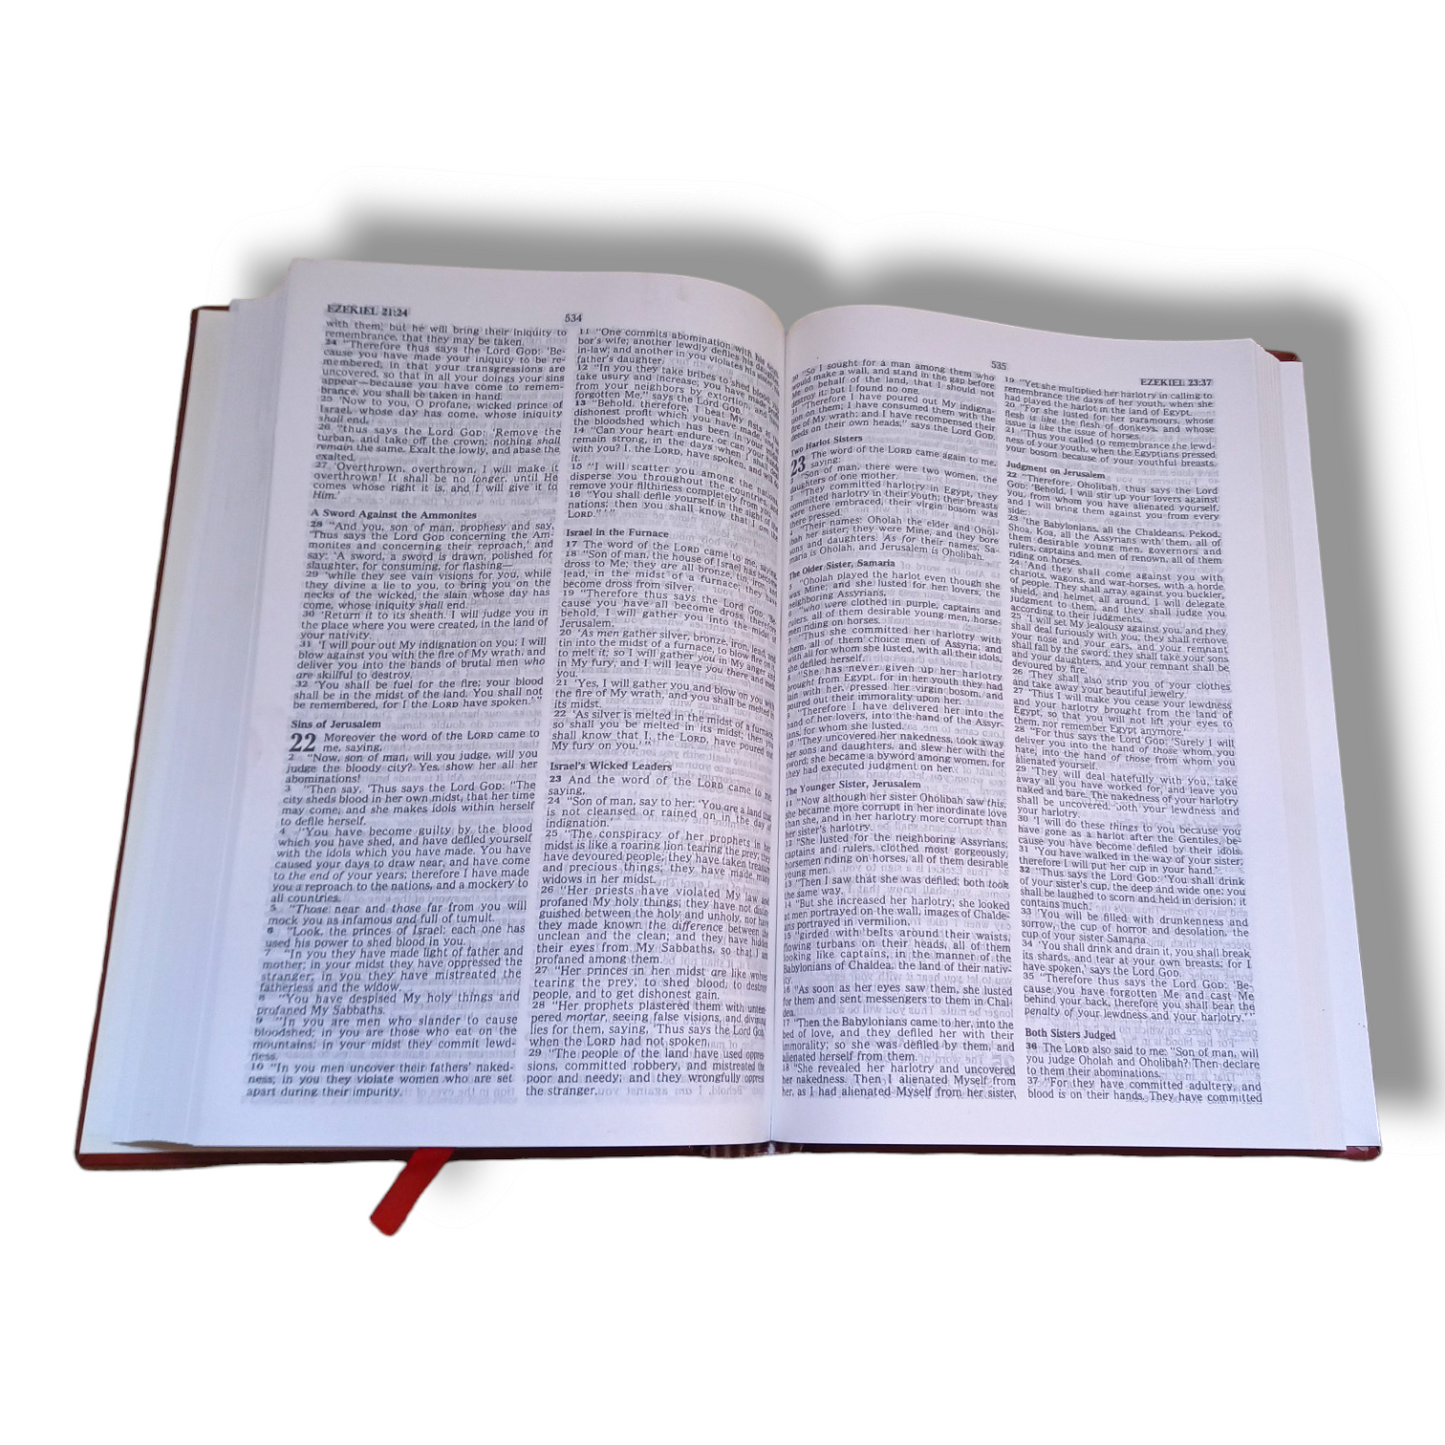 NKJV Holy Bible | Dictionary Concordance Bible | Hard Bound Edition | In Red Color Bound | New Edition